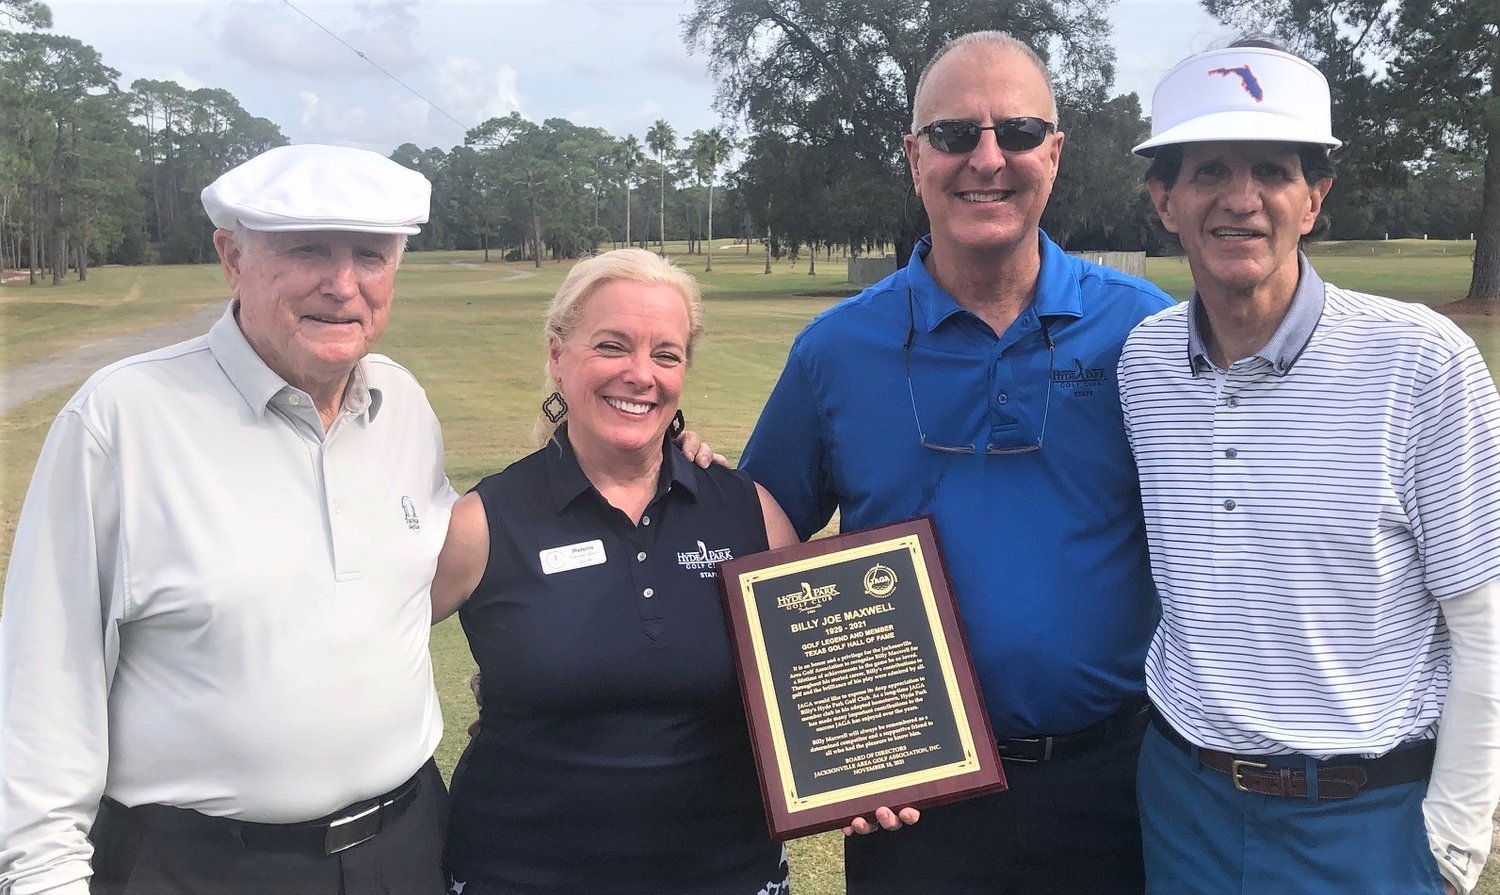 JAGA presents a plaque to Hyde Park and the family of Billy Maxwell. Pictured from left are former PGA TOUR commissioner Deane Beman, Hyde Park owners Melanie and Tommy Bevill, and JAGA president Jeff Adams.